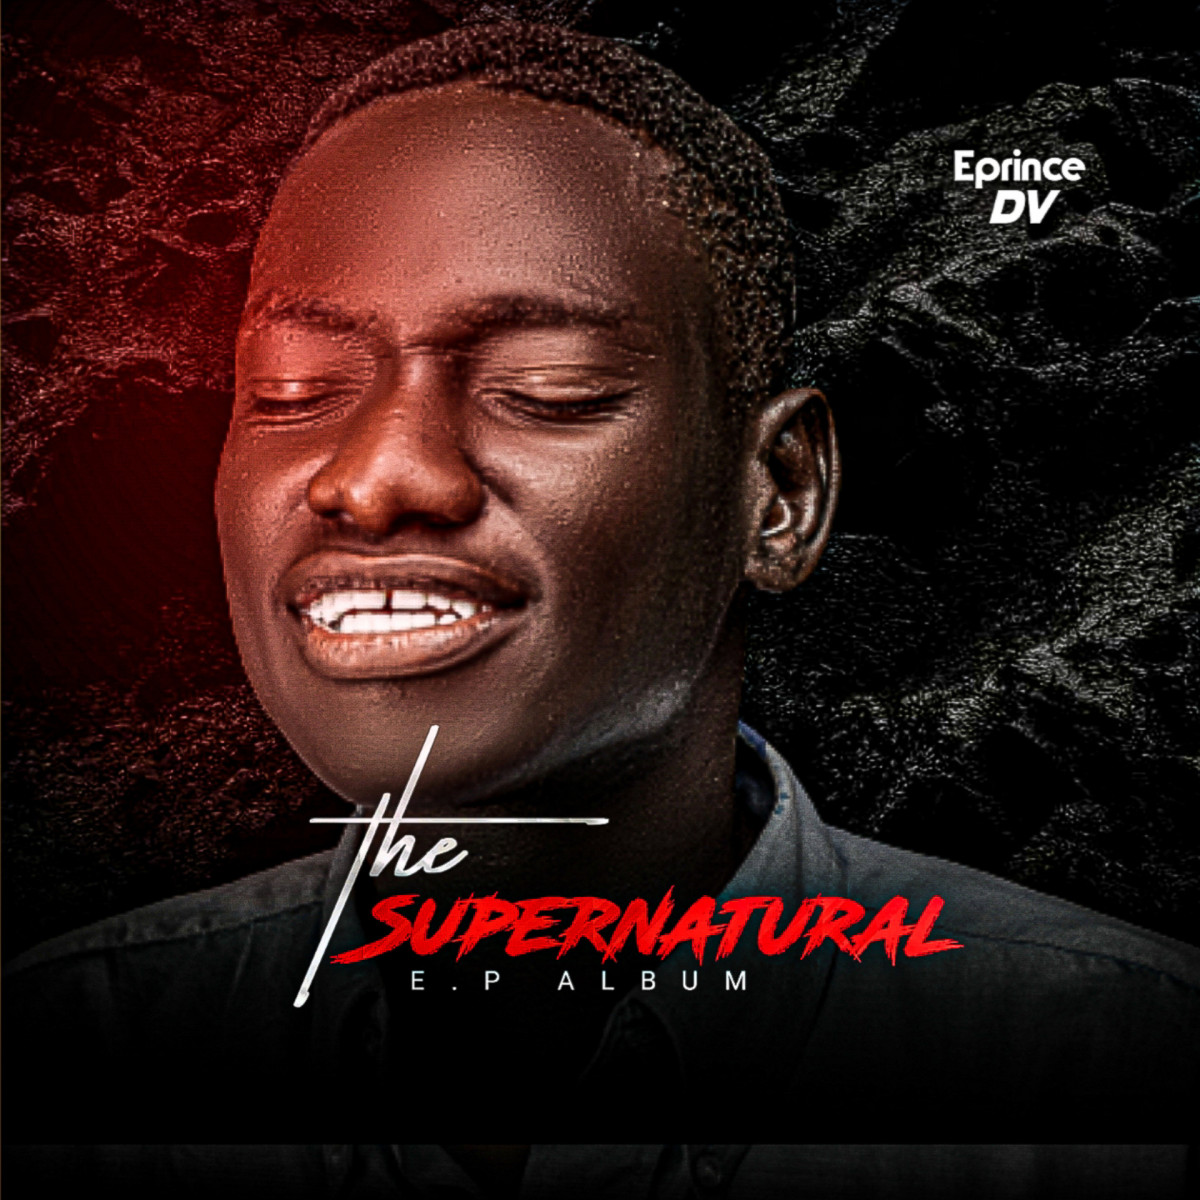 The Supernatural By Eprince DV